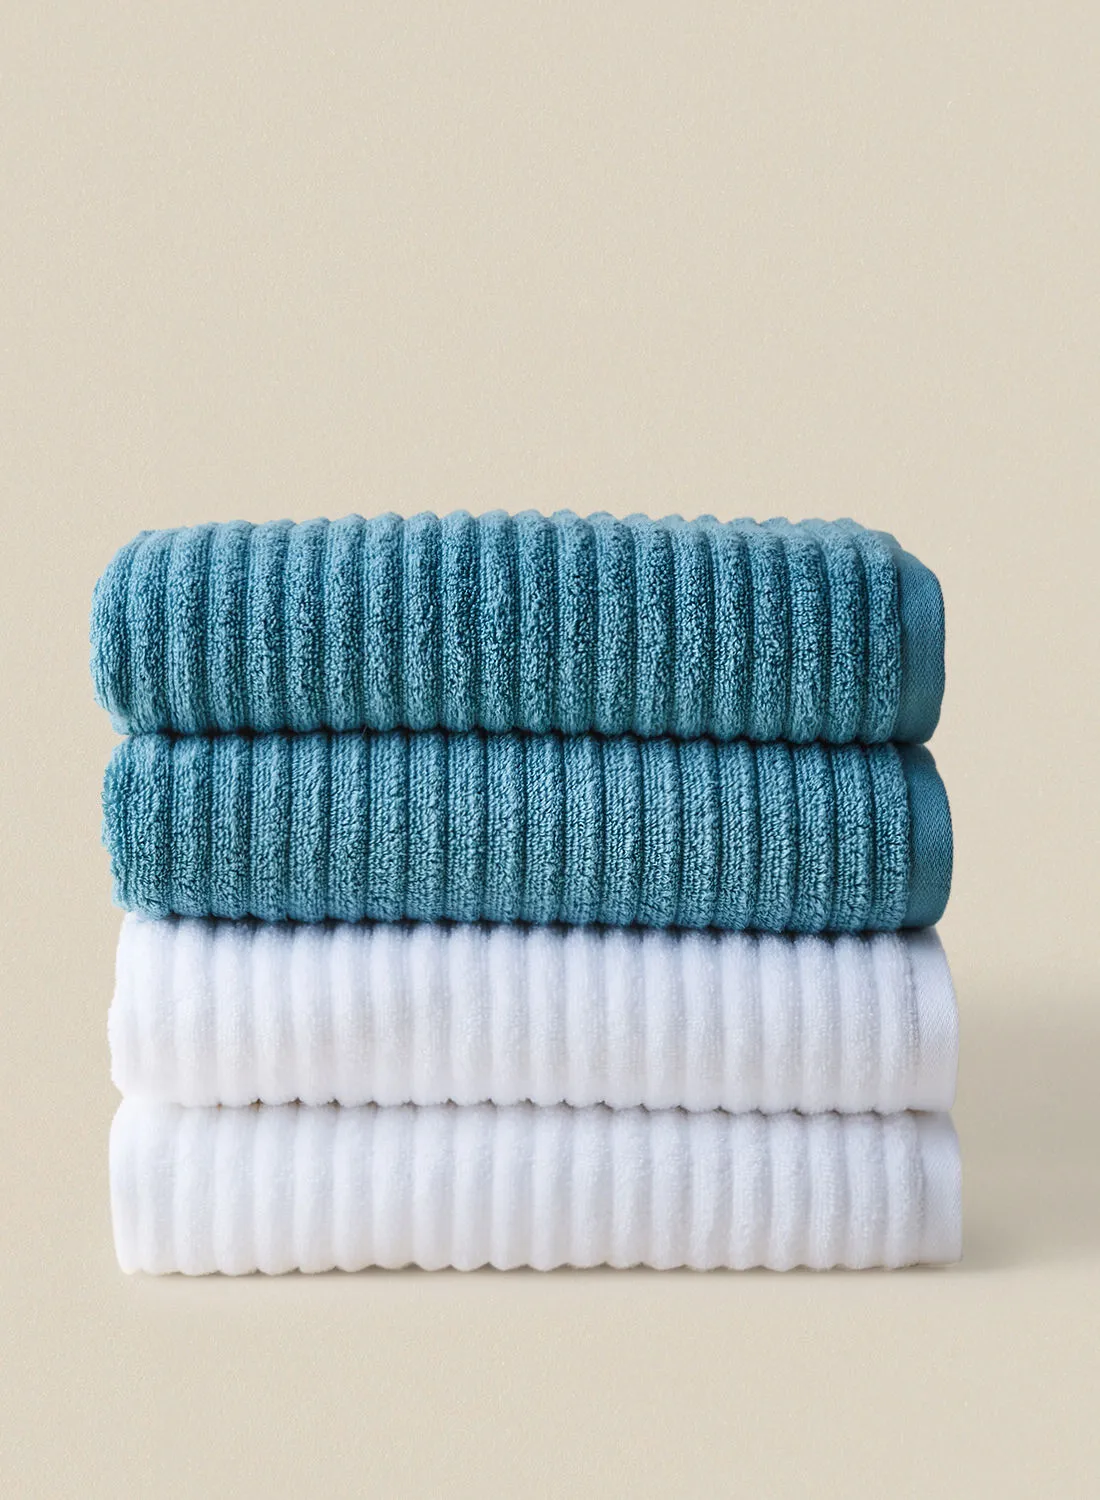 noon east 4 Piece Bathroom Towel Set - 450 GSM 100% Cotton Ribbed - 4 Bath Towel - Blue Color - Highly Absorbent - Fast Dry